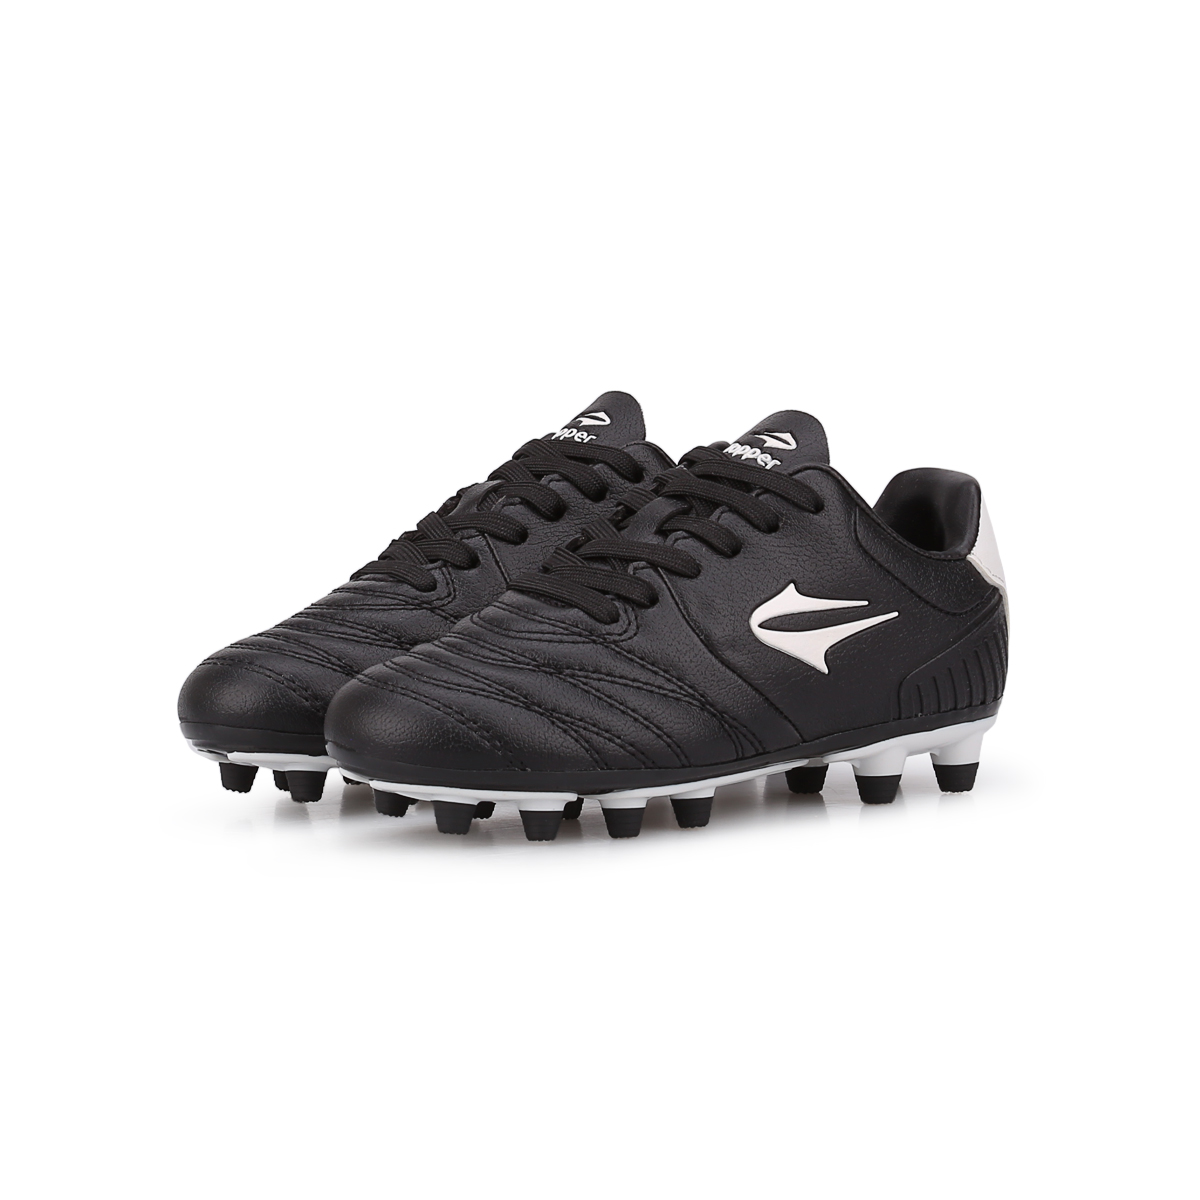 Botines Topper San Ciro V Firm Ground,  image number null